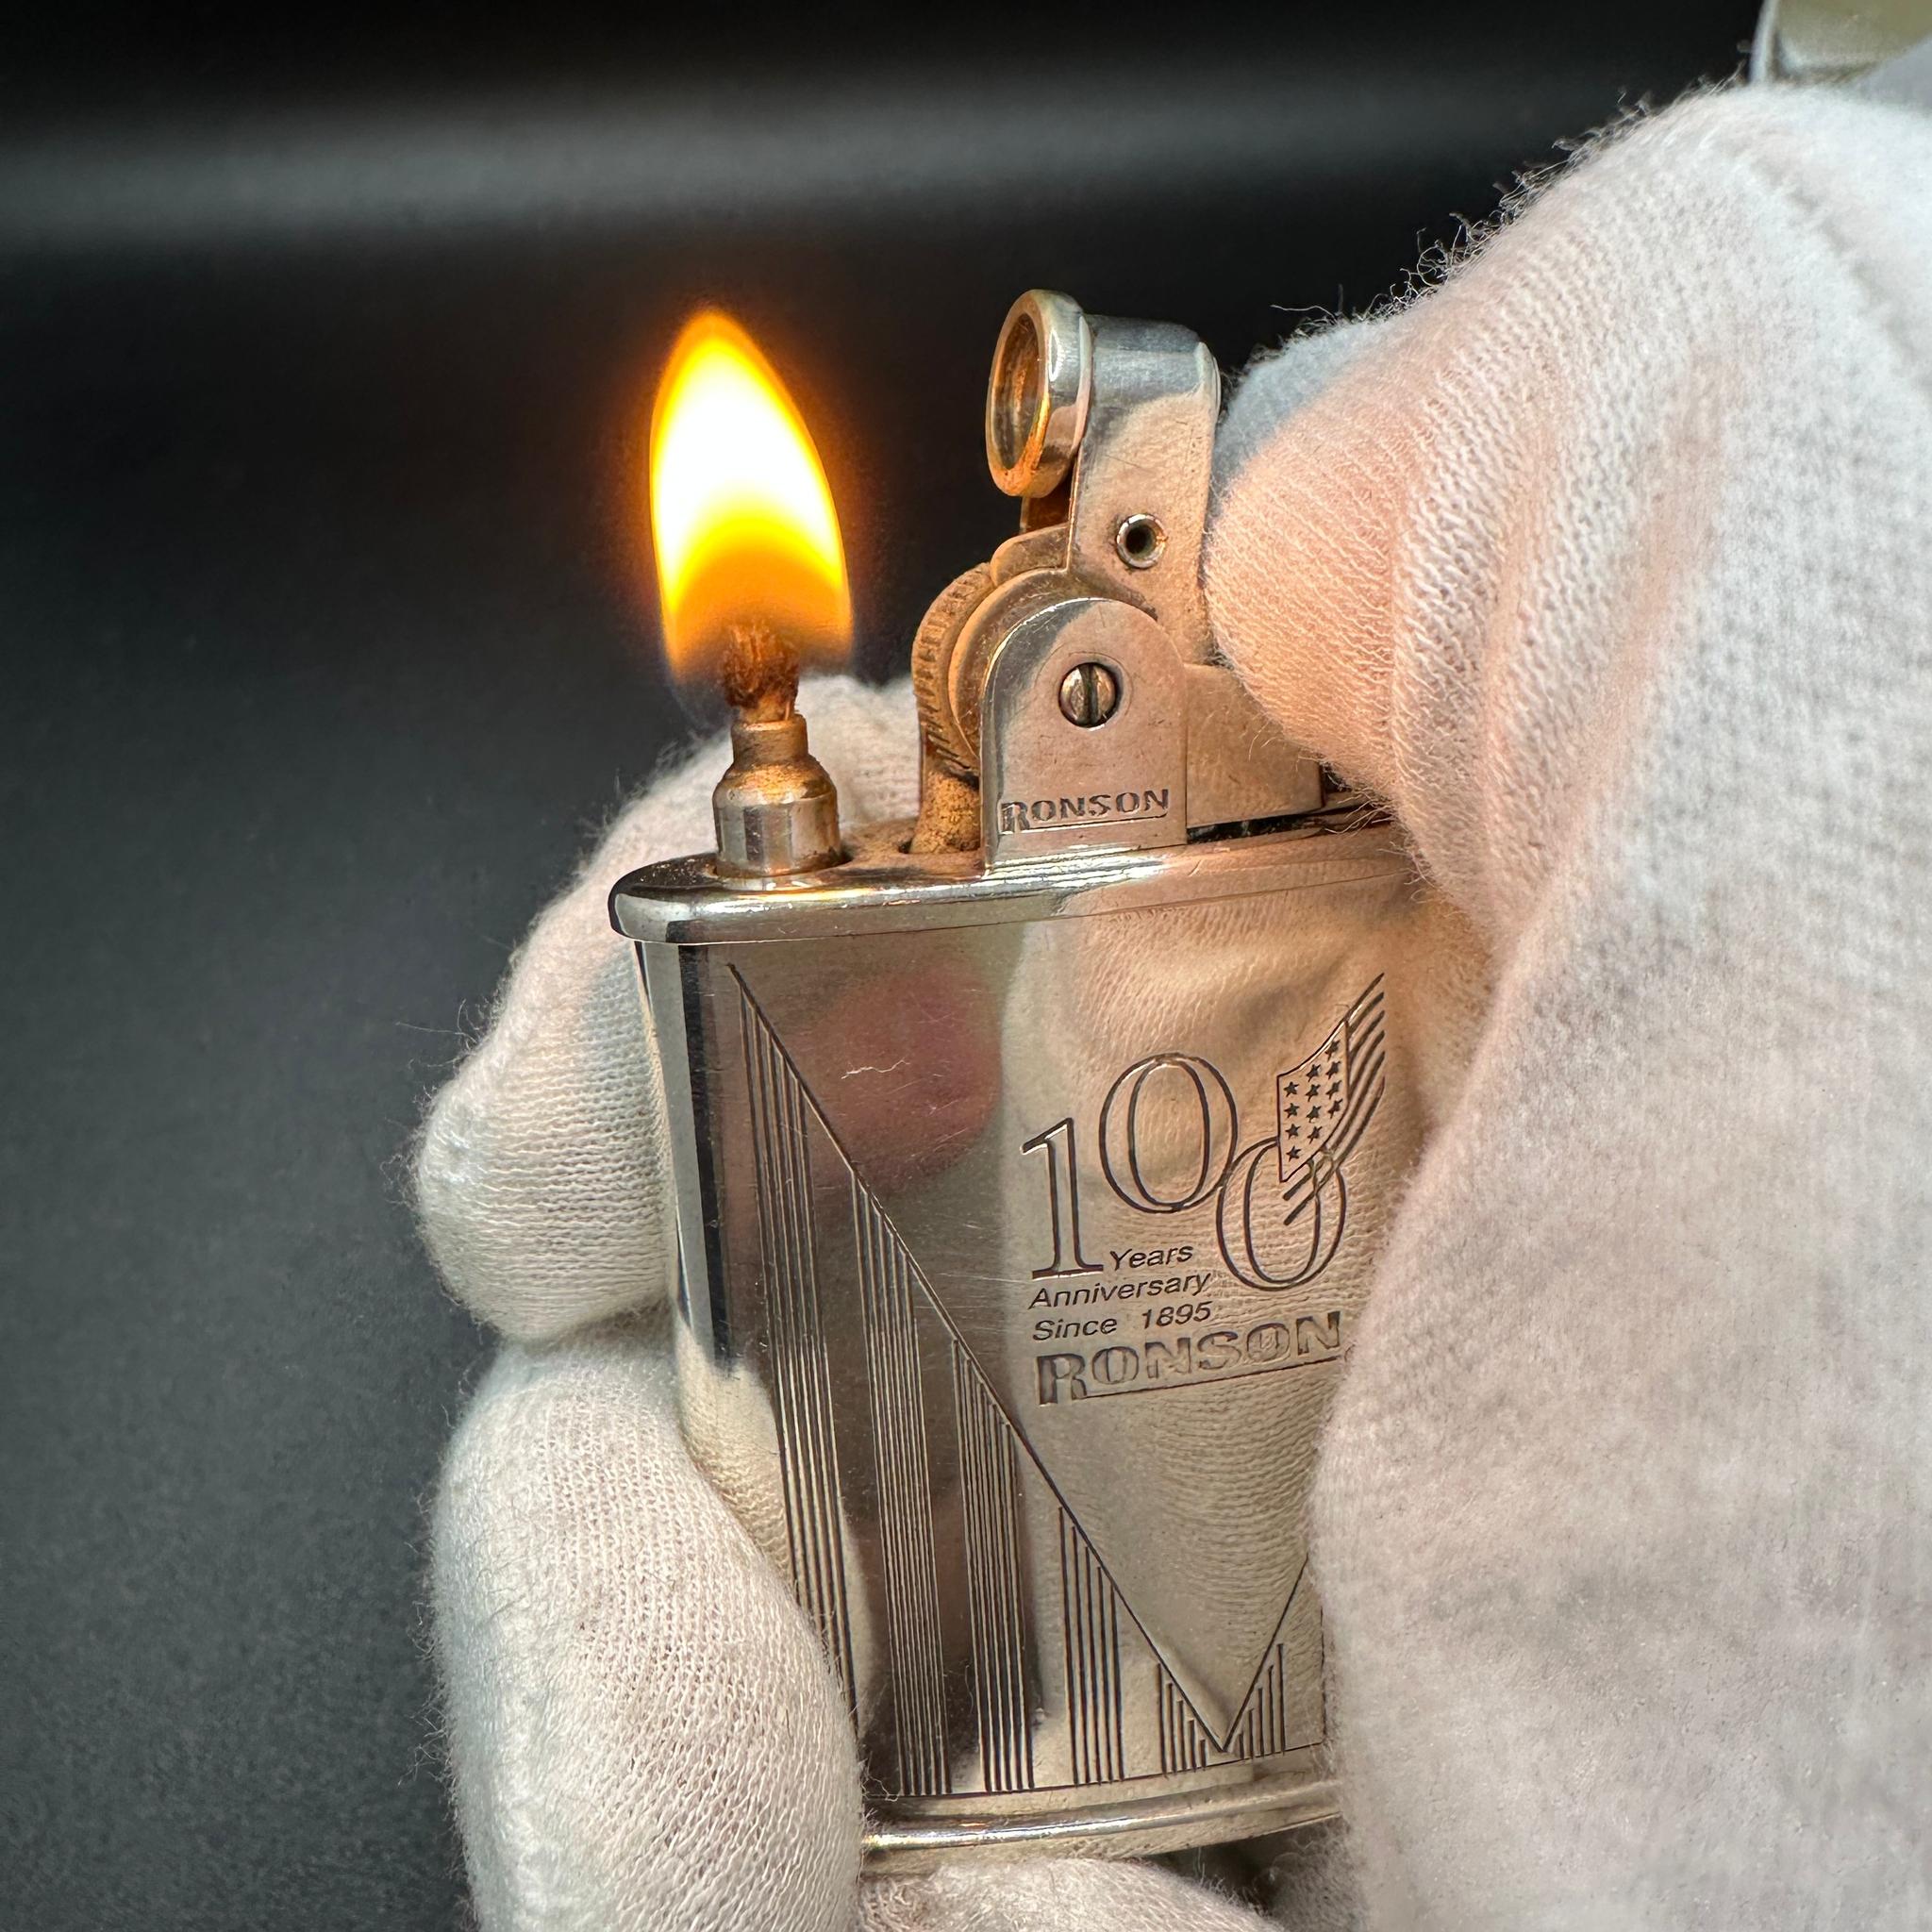 Ronson “1943” Limited Edition 100 Year Anniversary Silver Plated Vintage Lighter 2